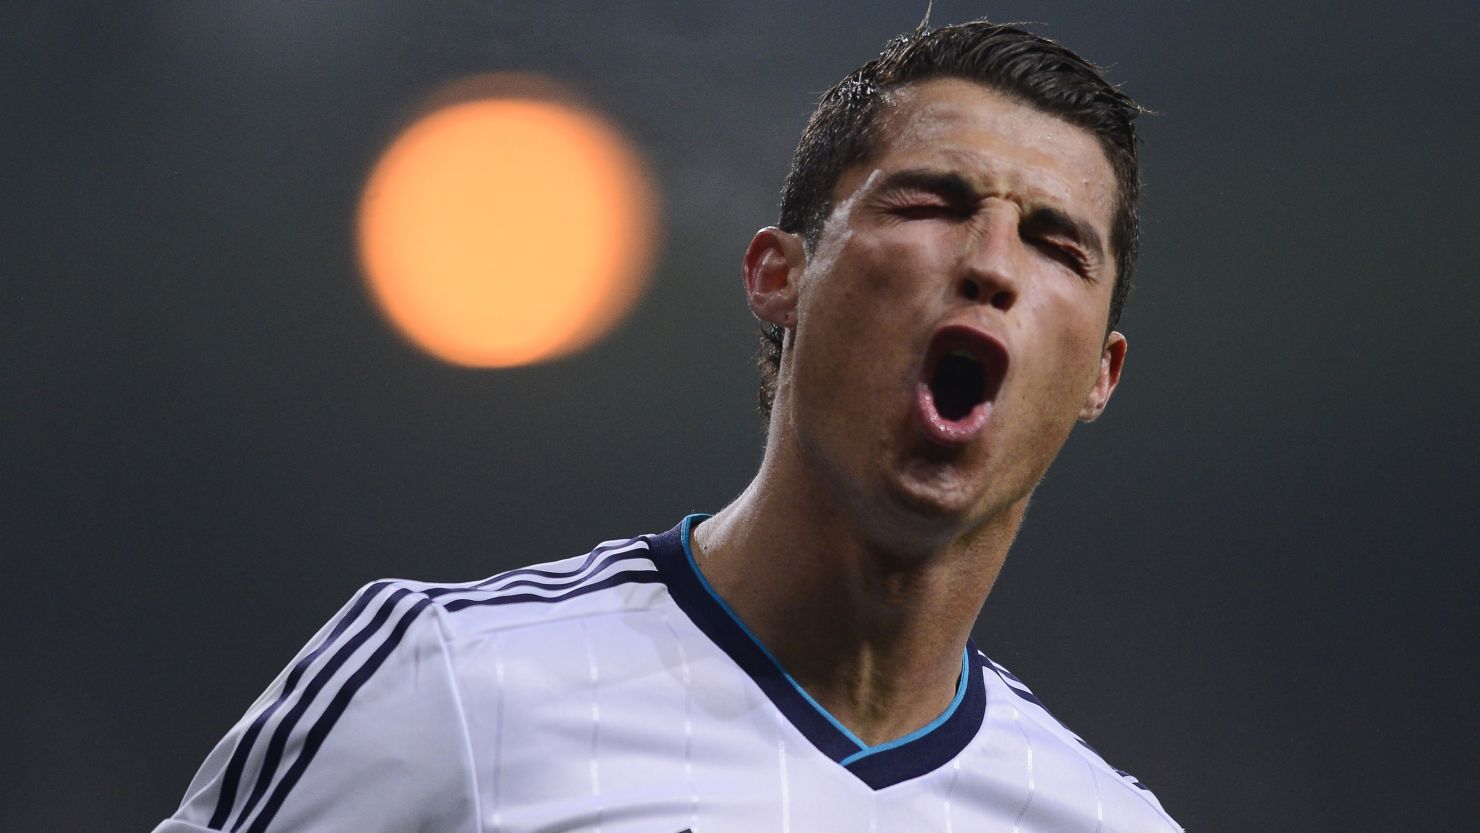 Real Madrid's Cristiano Ronaldo has been voted the second best player in the world in each of the last two years.